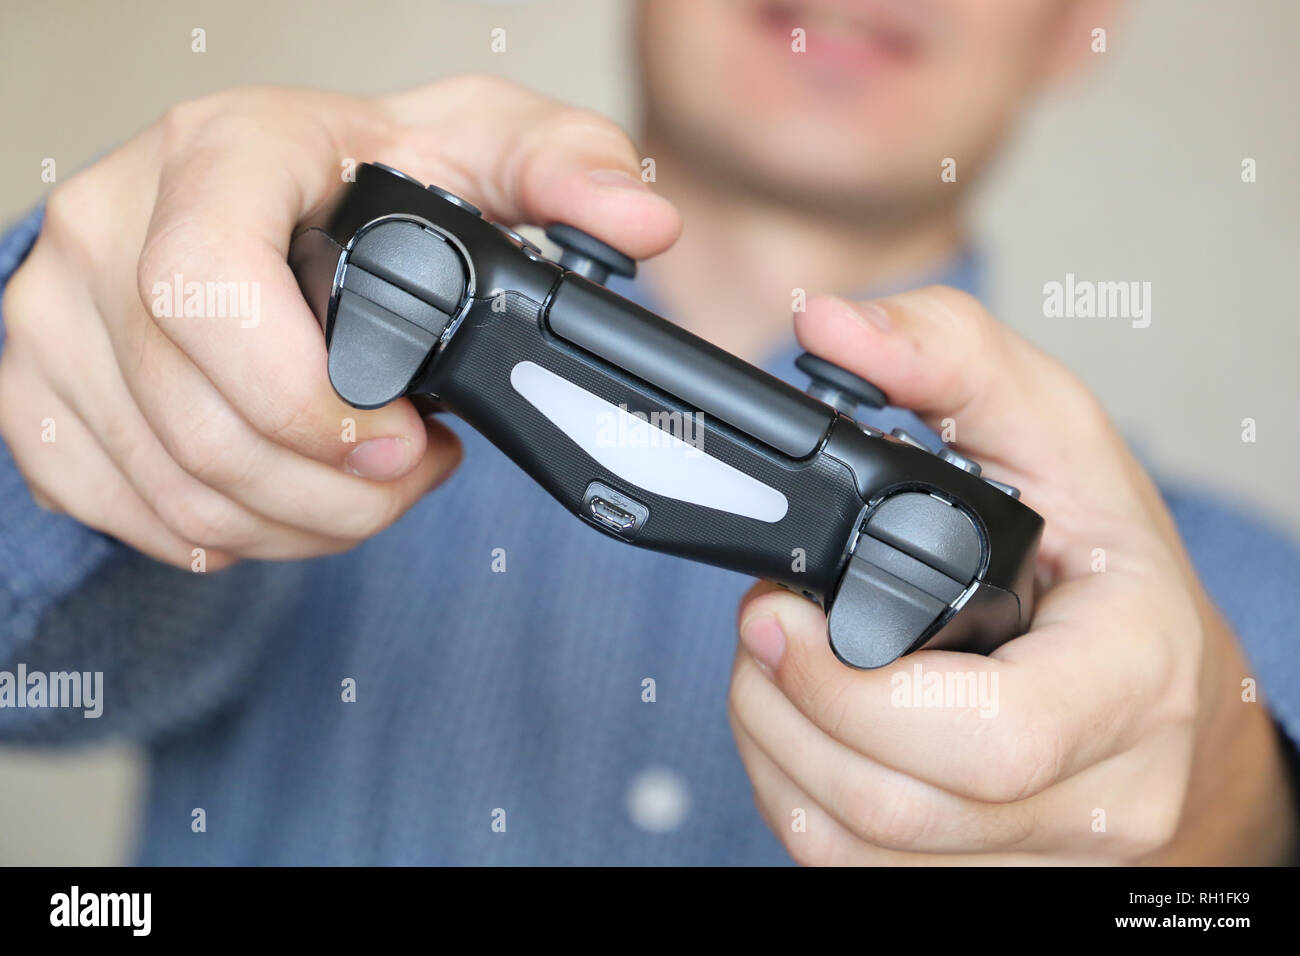 Joystick in male hands close-up, gamer playing video games with gamepad. Gaming addiction concept, home leisure Stock Photo